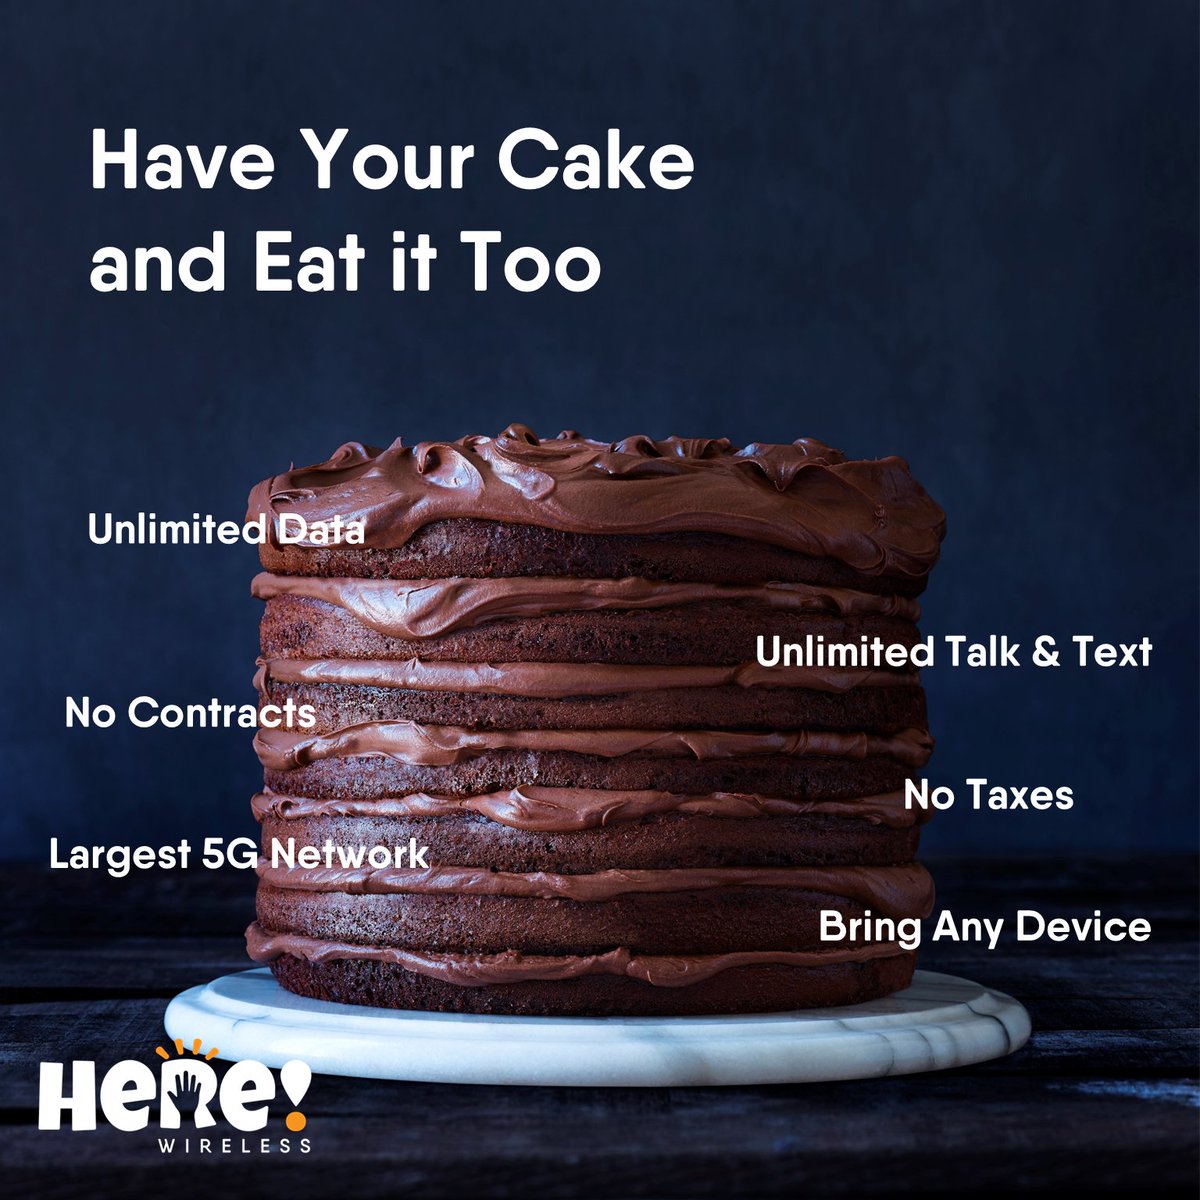 Life is about having it all. 
Everything you need and want in a cellphone company is HERE!
HEREwireless.com

#herewireless #cakelover #cellphoneplans #chocolatecake #iwantcake #Foodie #eatcake